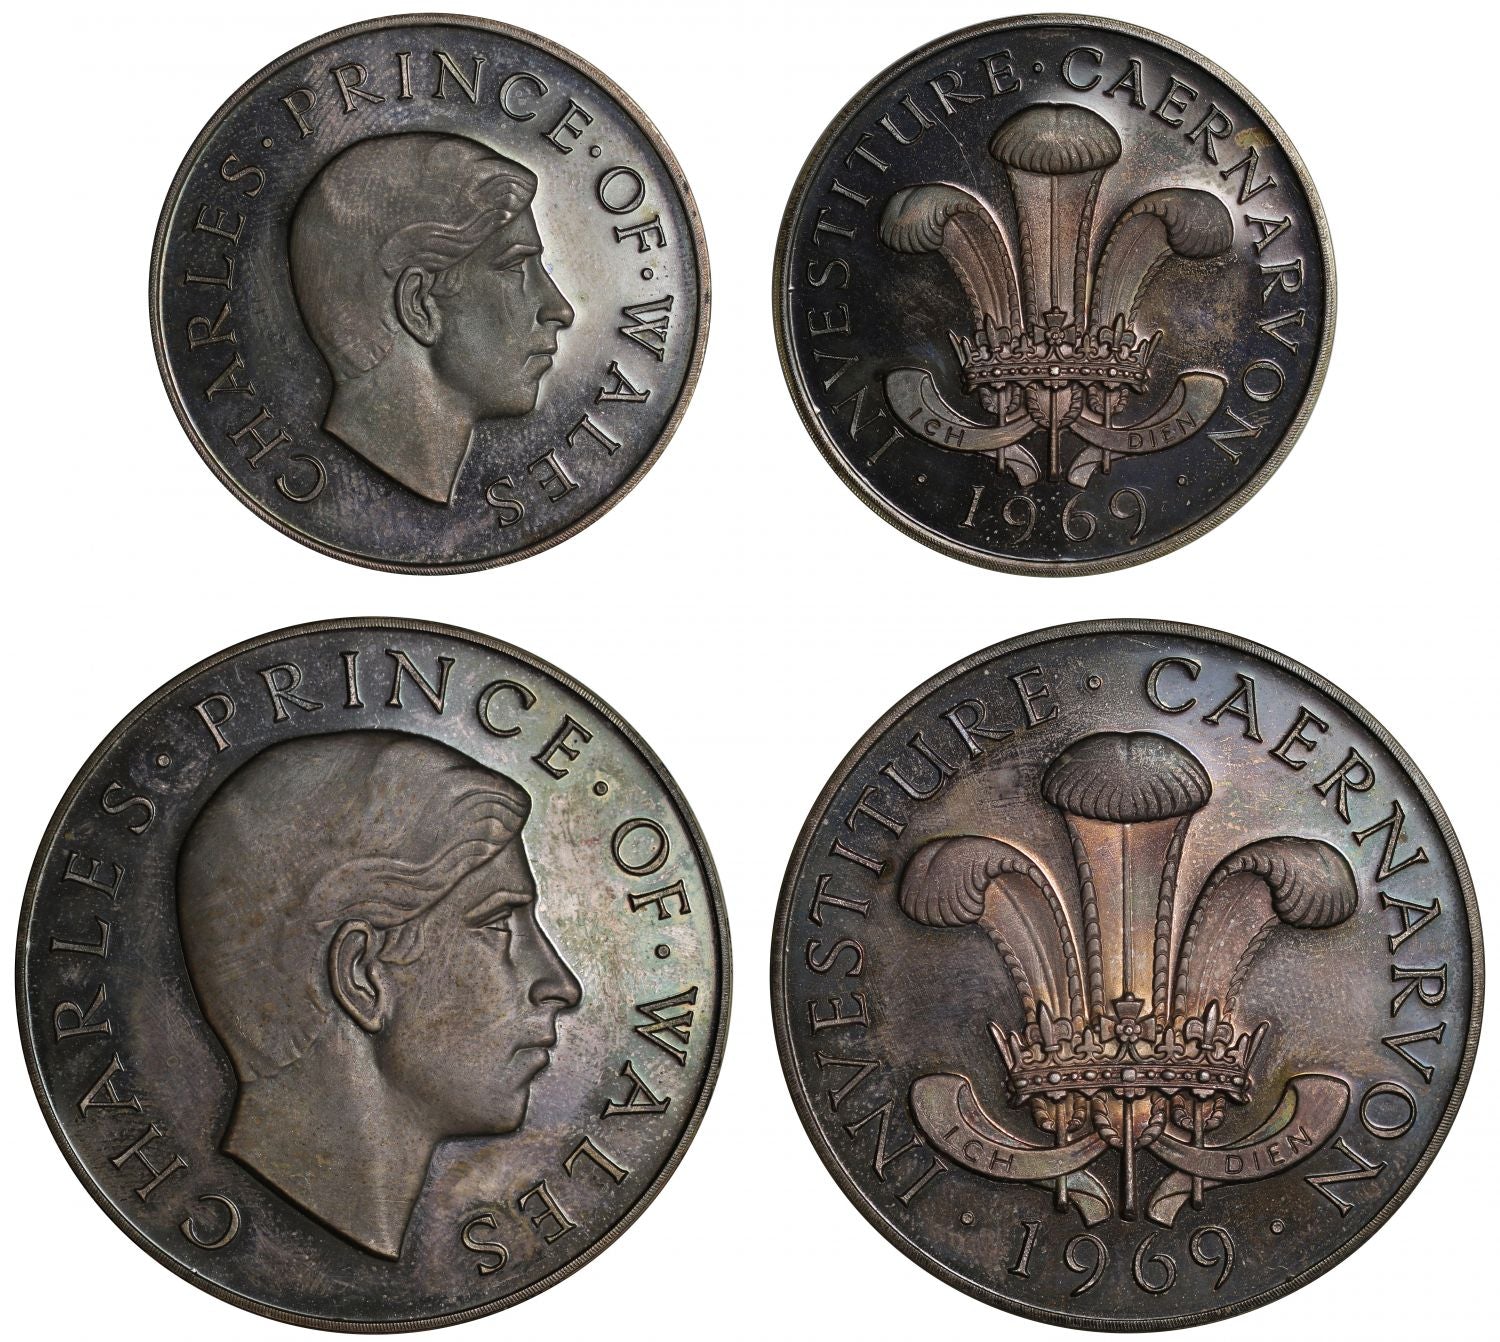 Prince of Wales, Investiture, 1969, two-medal Set.